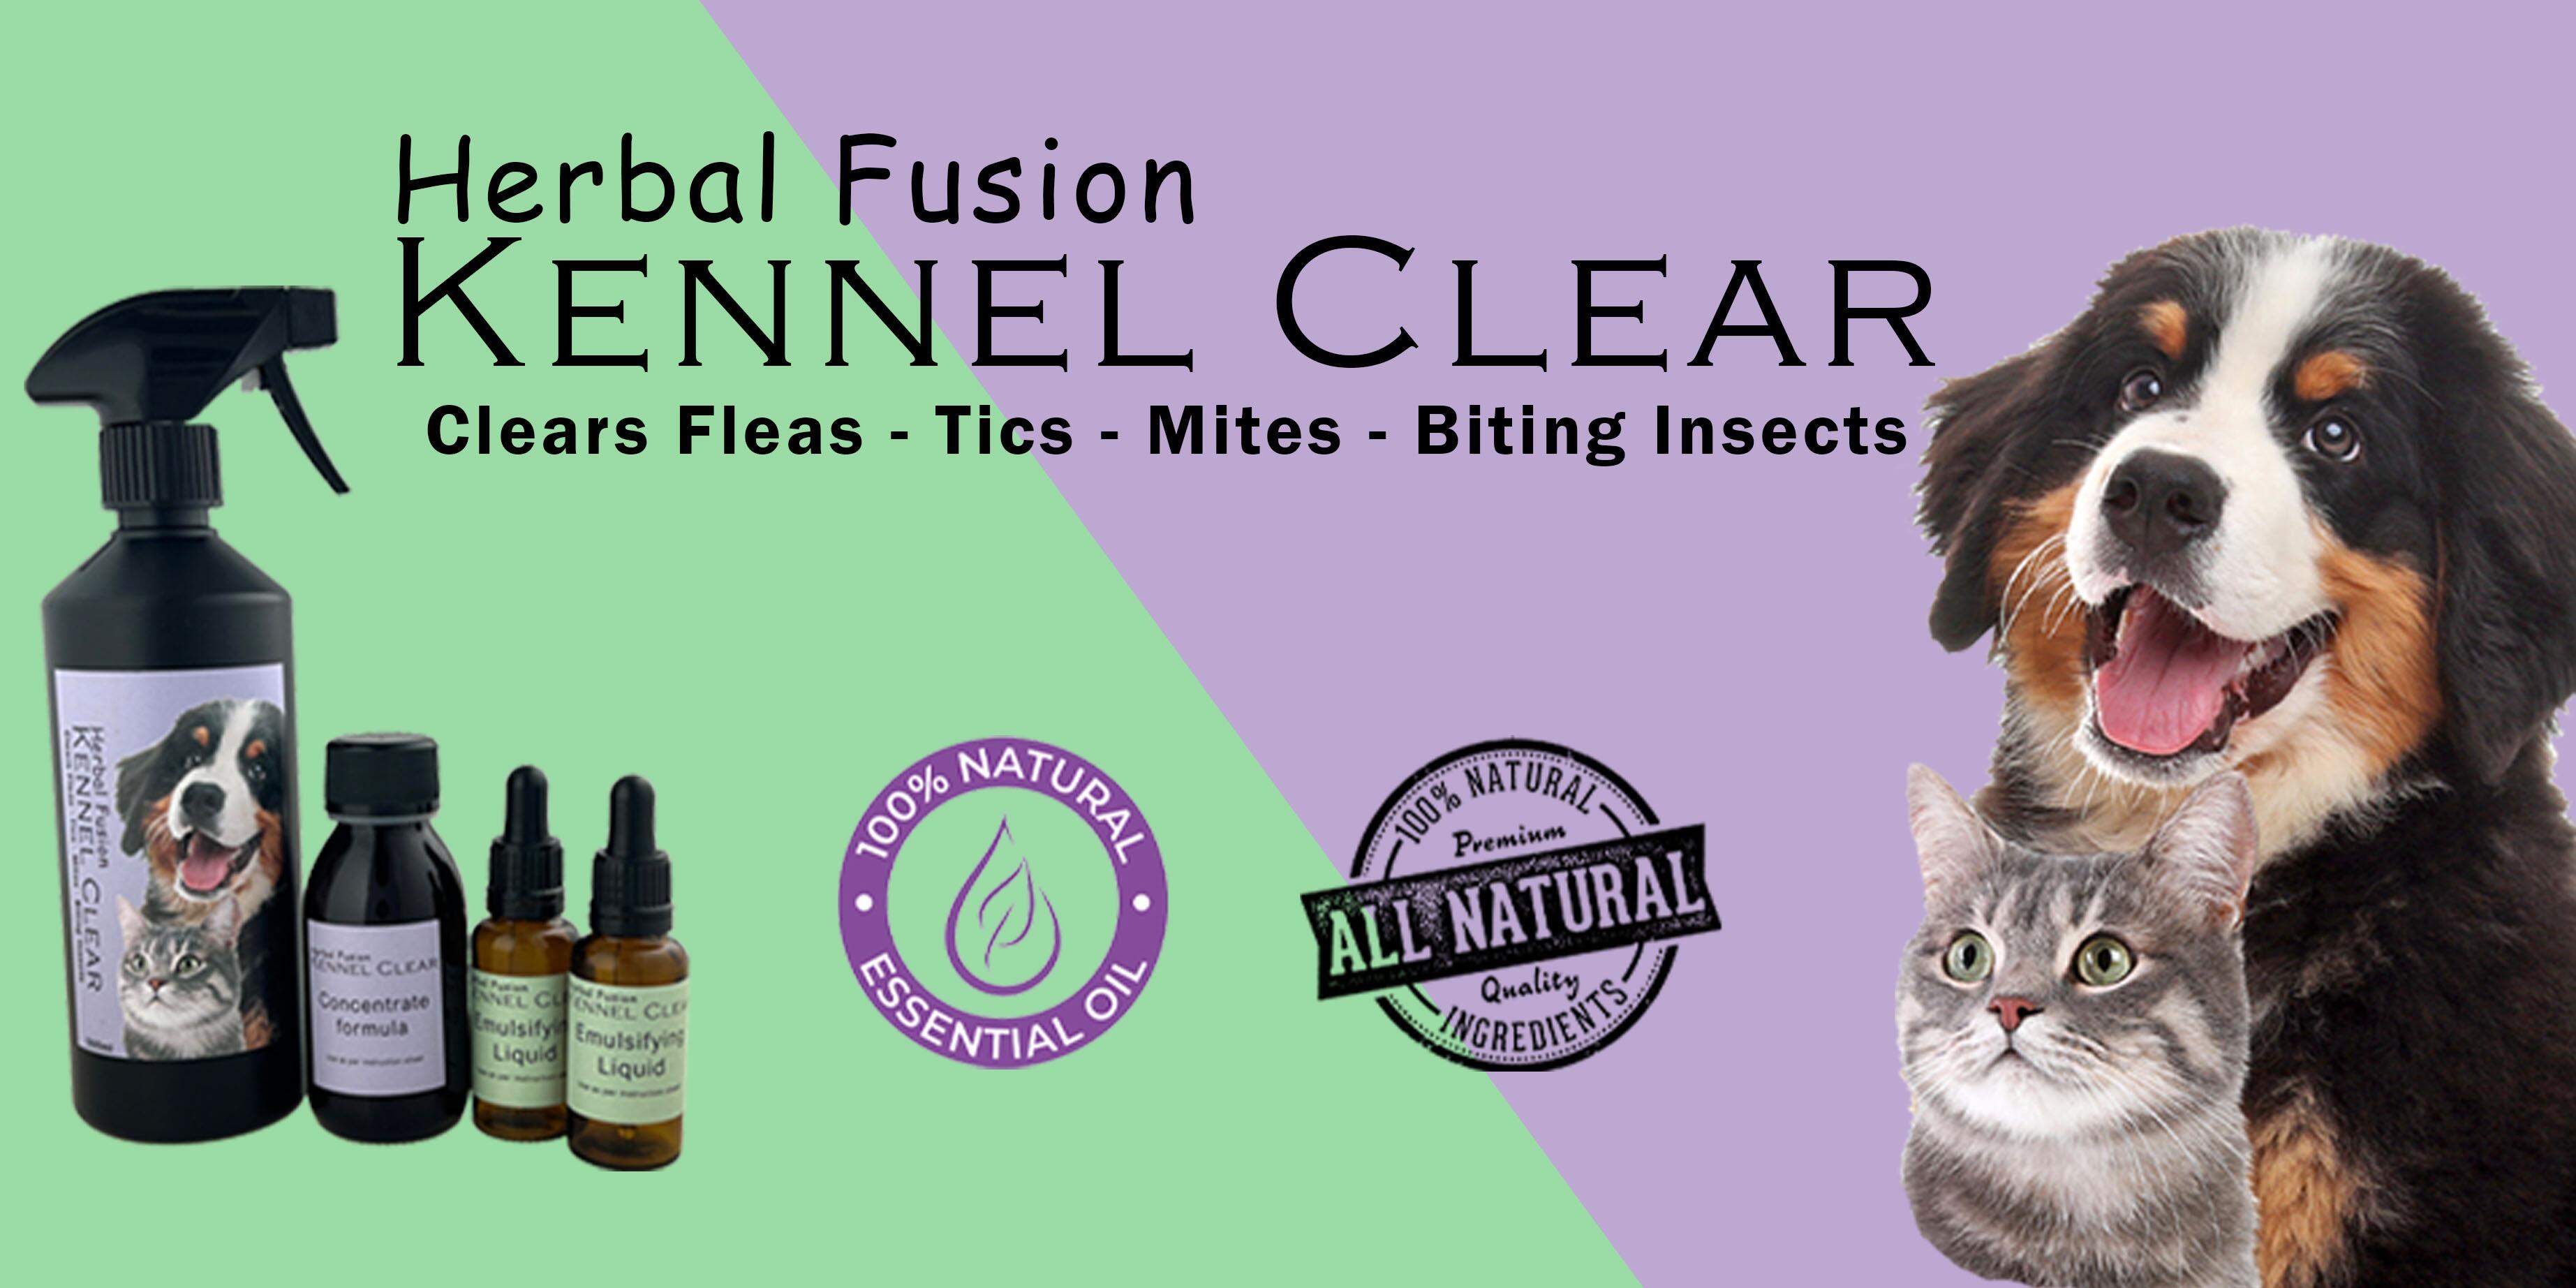 Herbal Fusion Kennel Clear